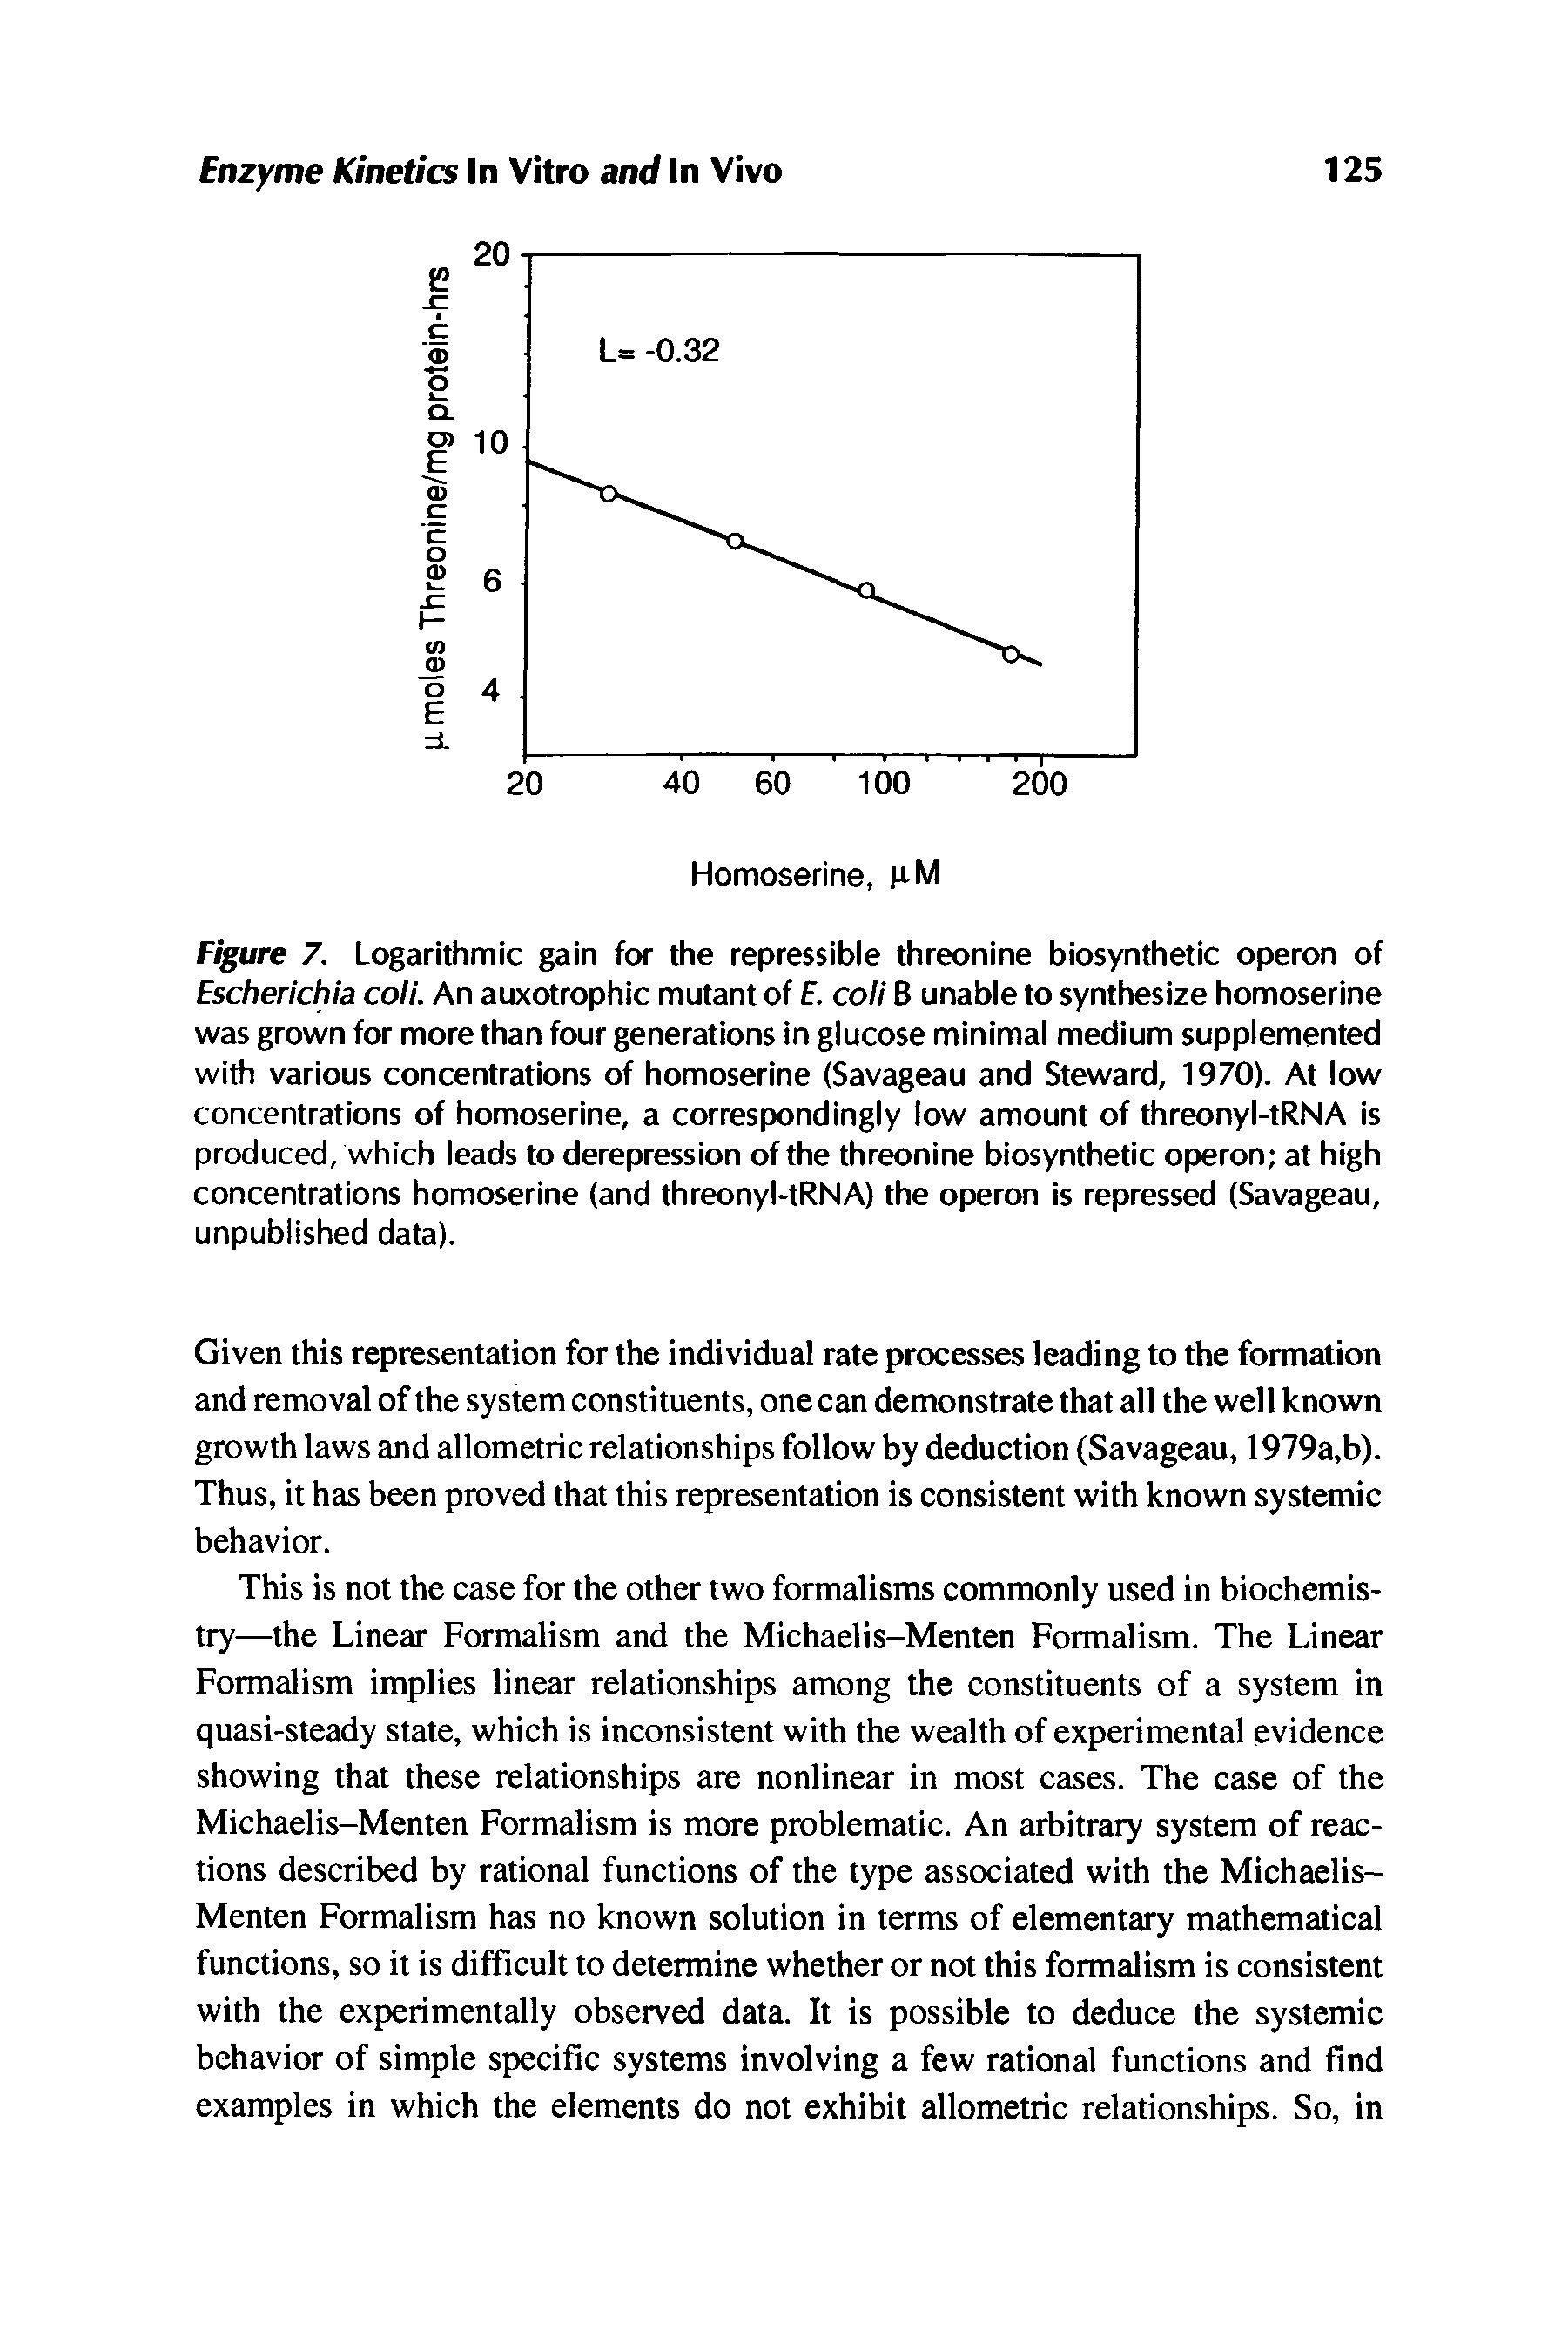 Figure 7. Logarithmic gain for the repressible threonine biosynthetic operon of Escherichia coli. An auxotrophic mutant of E. coli B unable to synthesize homoserine was grown for more than four generations in glucose minimal medium supplemented with various concentrations of homoserine (Savageau and Steward, 1970). At low concentrations of homoserine, a correspondingly low amount of threonyl-tRNA is produced, which leads to derepression of the threonine biosynthetic operon at high concentrations homoserine (and threonyl-tRNA) the operon is repressed (Savageau, unpublished data).